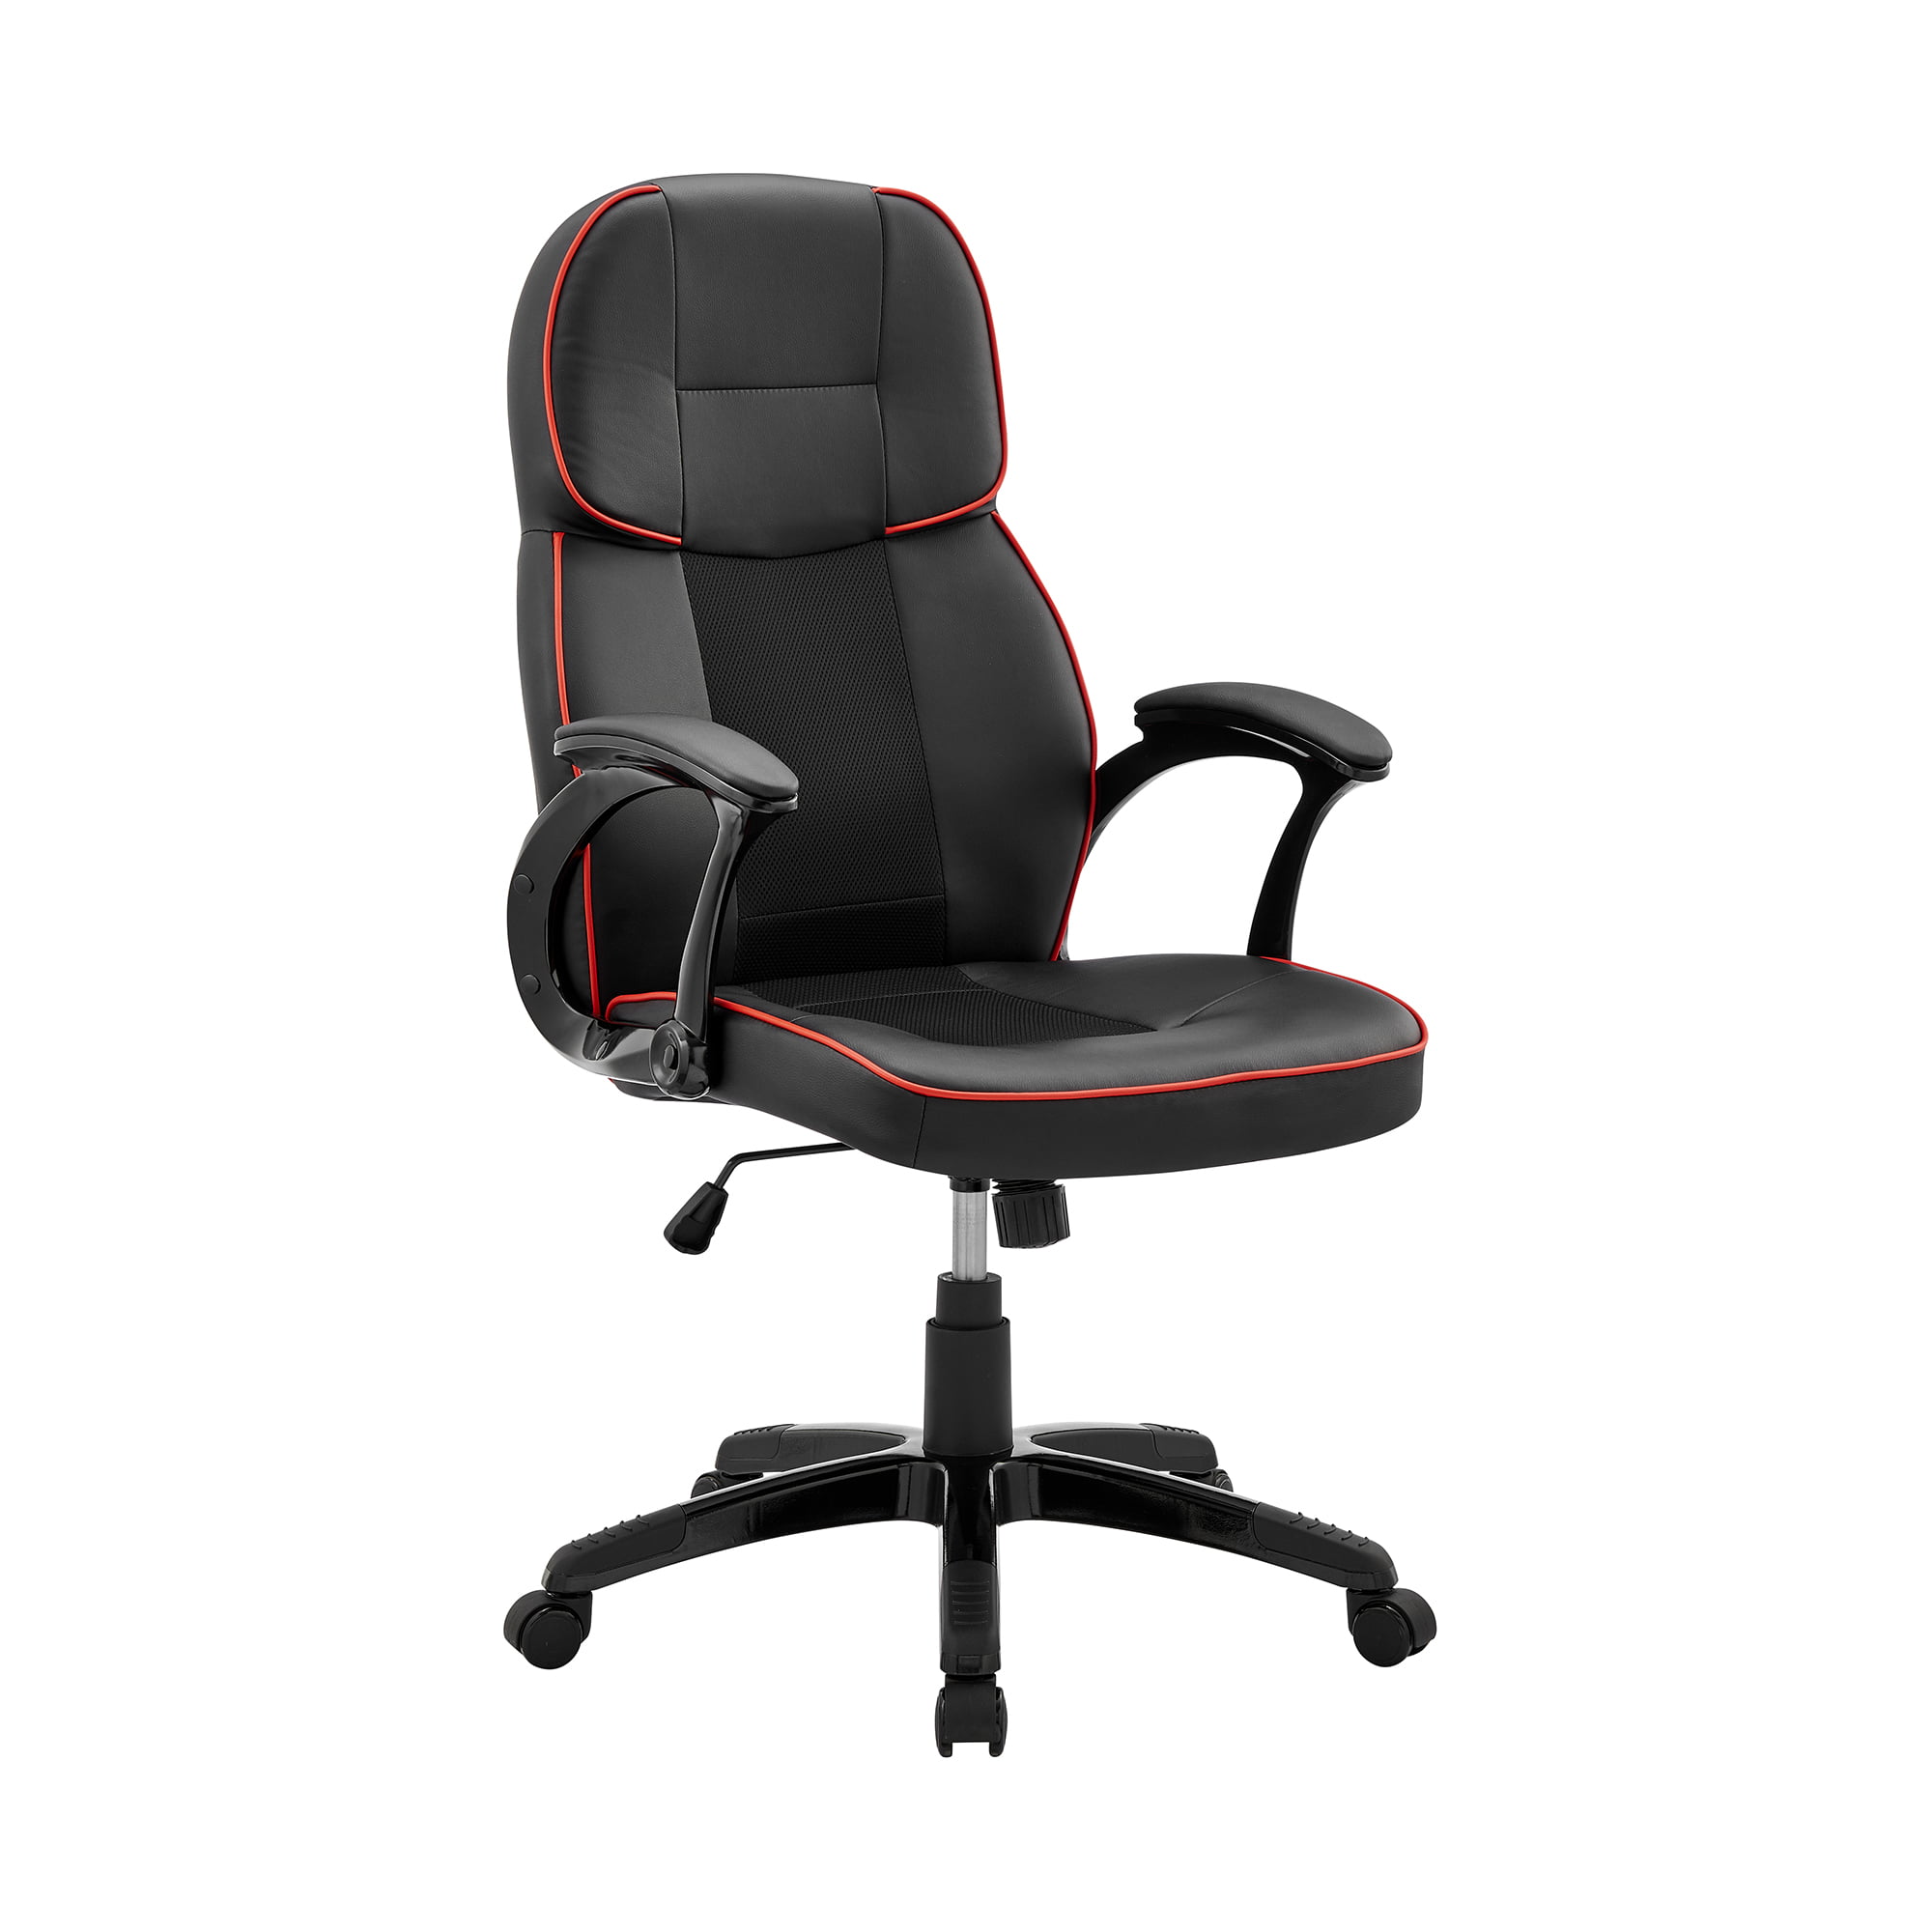 Picture of Armen Living LCBEGCRDBLK Bender Adjustable Racing Gaming Chair in Black Faux Leather with Red Accents